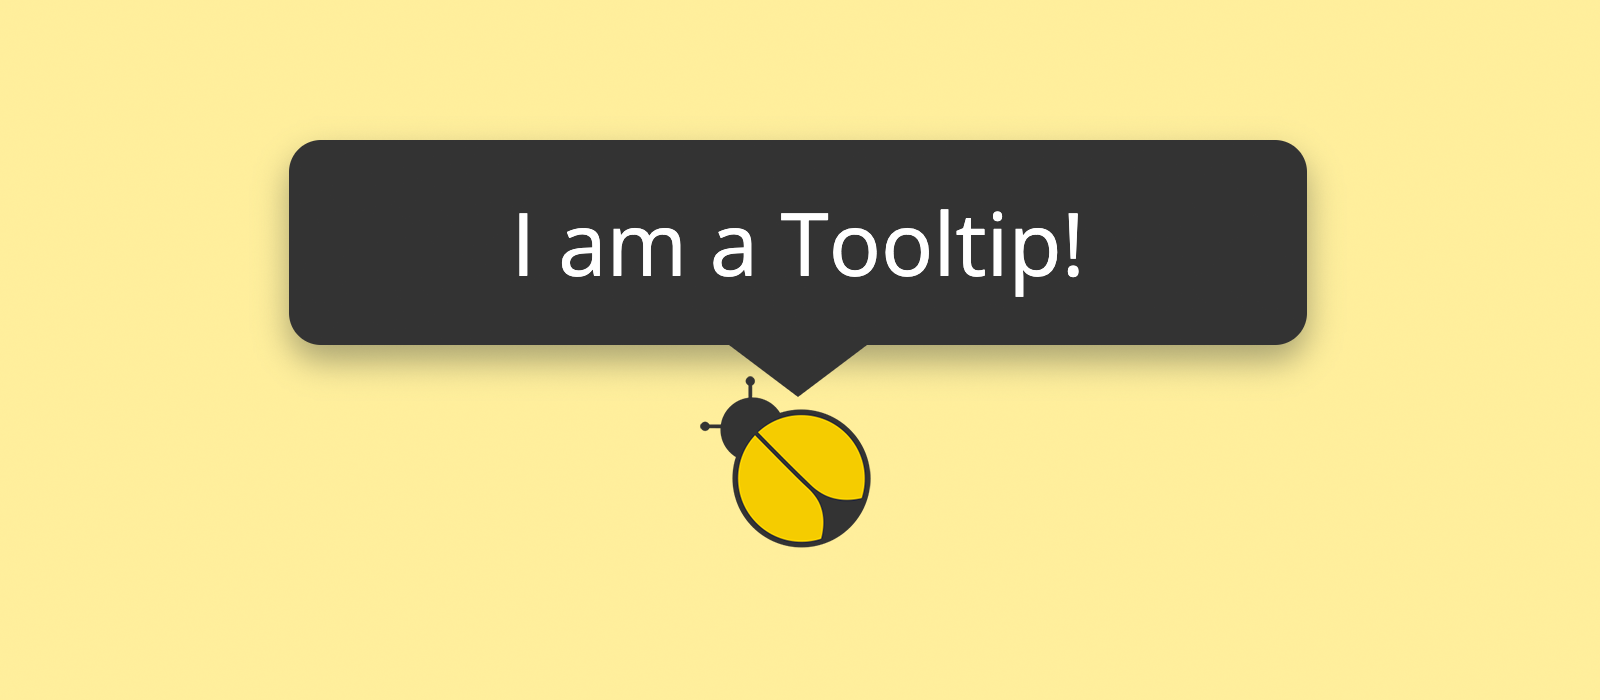 Drawing a Tooltip with CSS: Can a Border Give Shape to a Triangle?